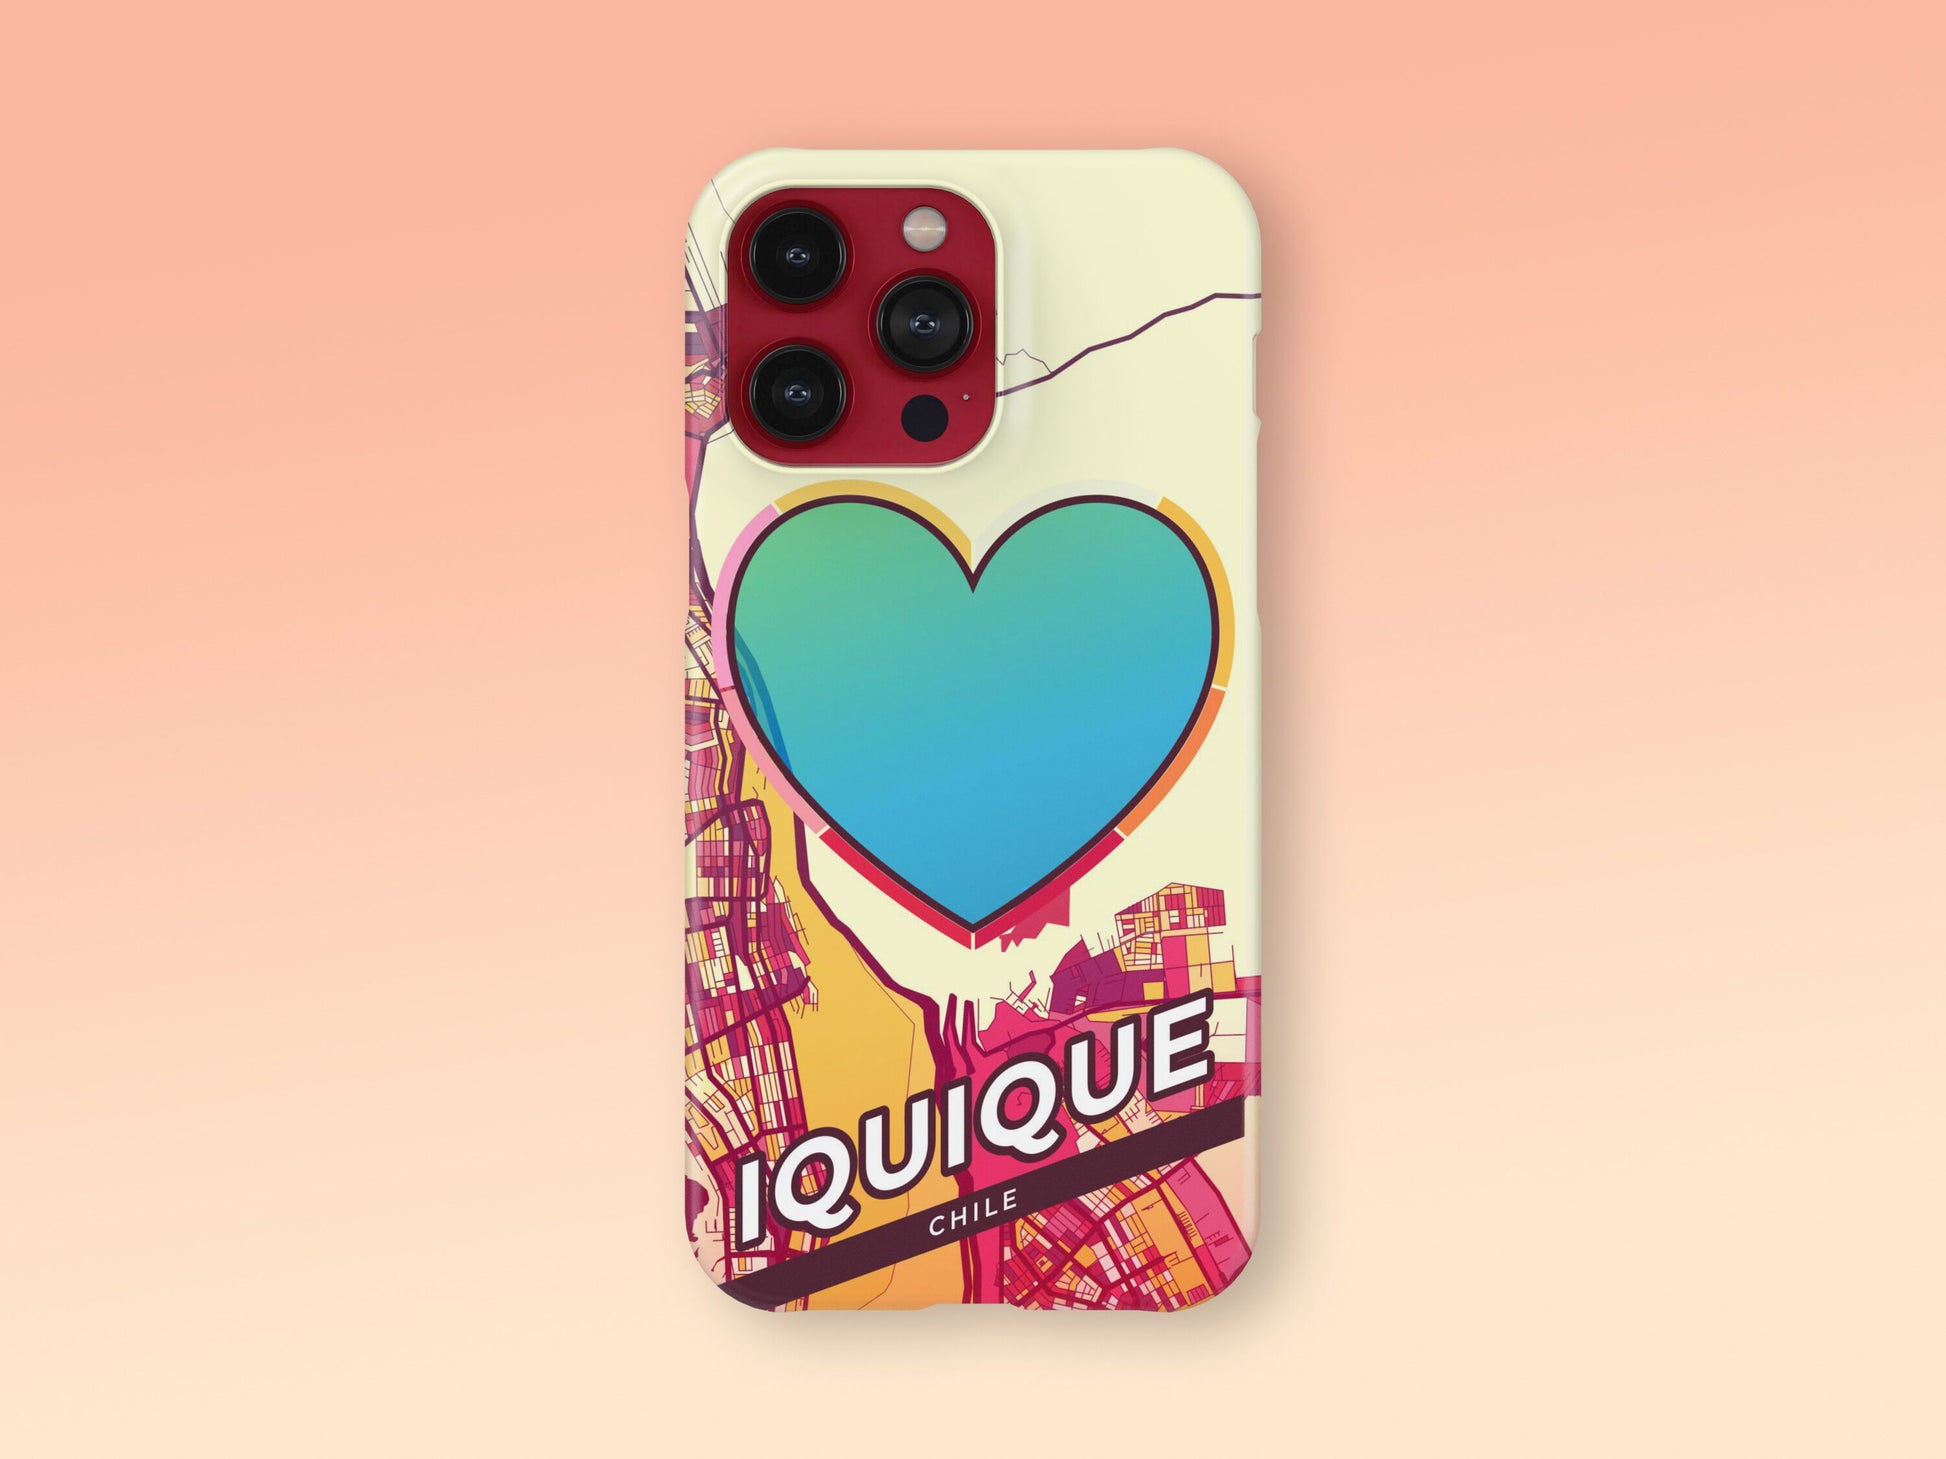 Iquique Chile slim phone case with colorful icon. Birthday, wedding or housewarming gift. Couple match cases. 2